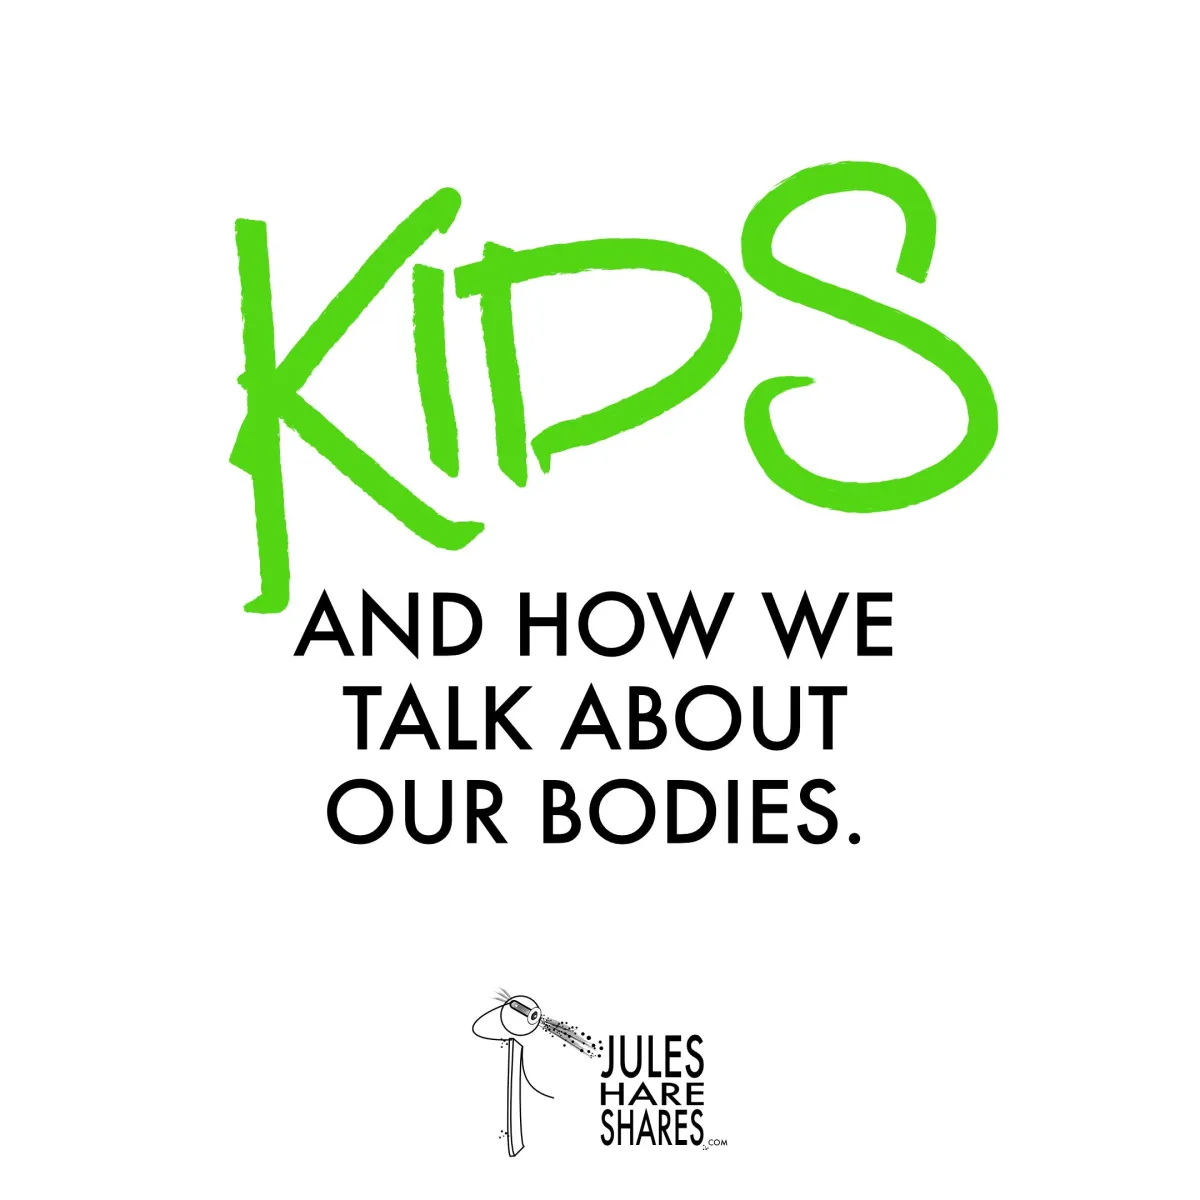 kids and how we talk about our bodies